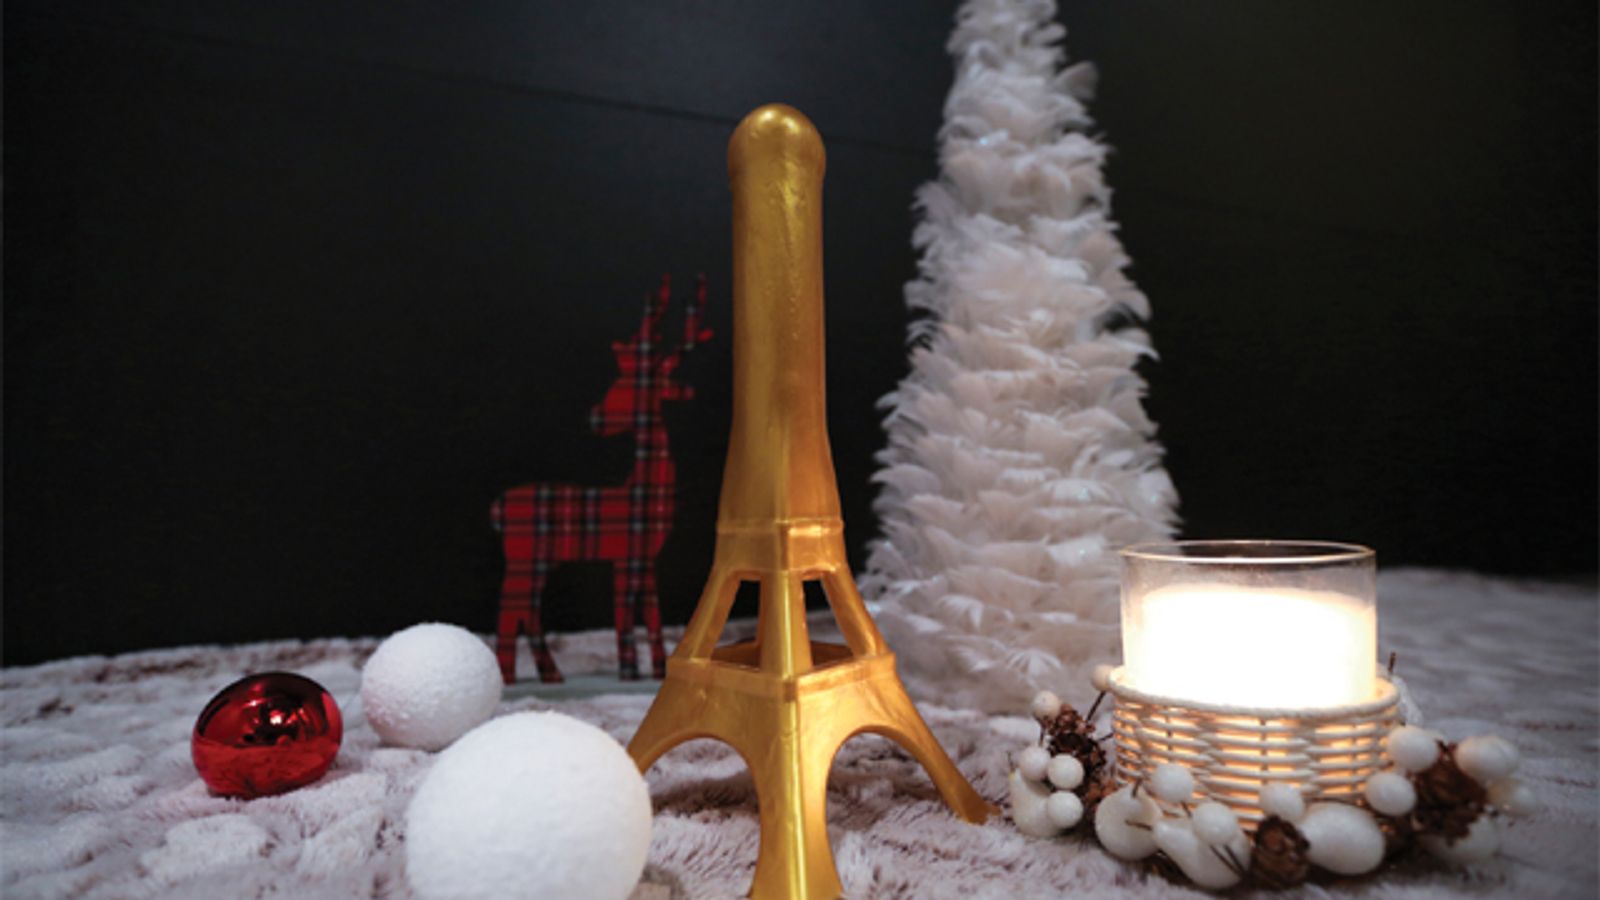 Entrenue Named Exclusive Distributor of Eiffel Tower Dil